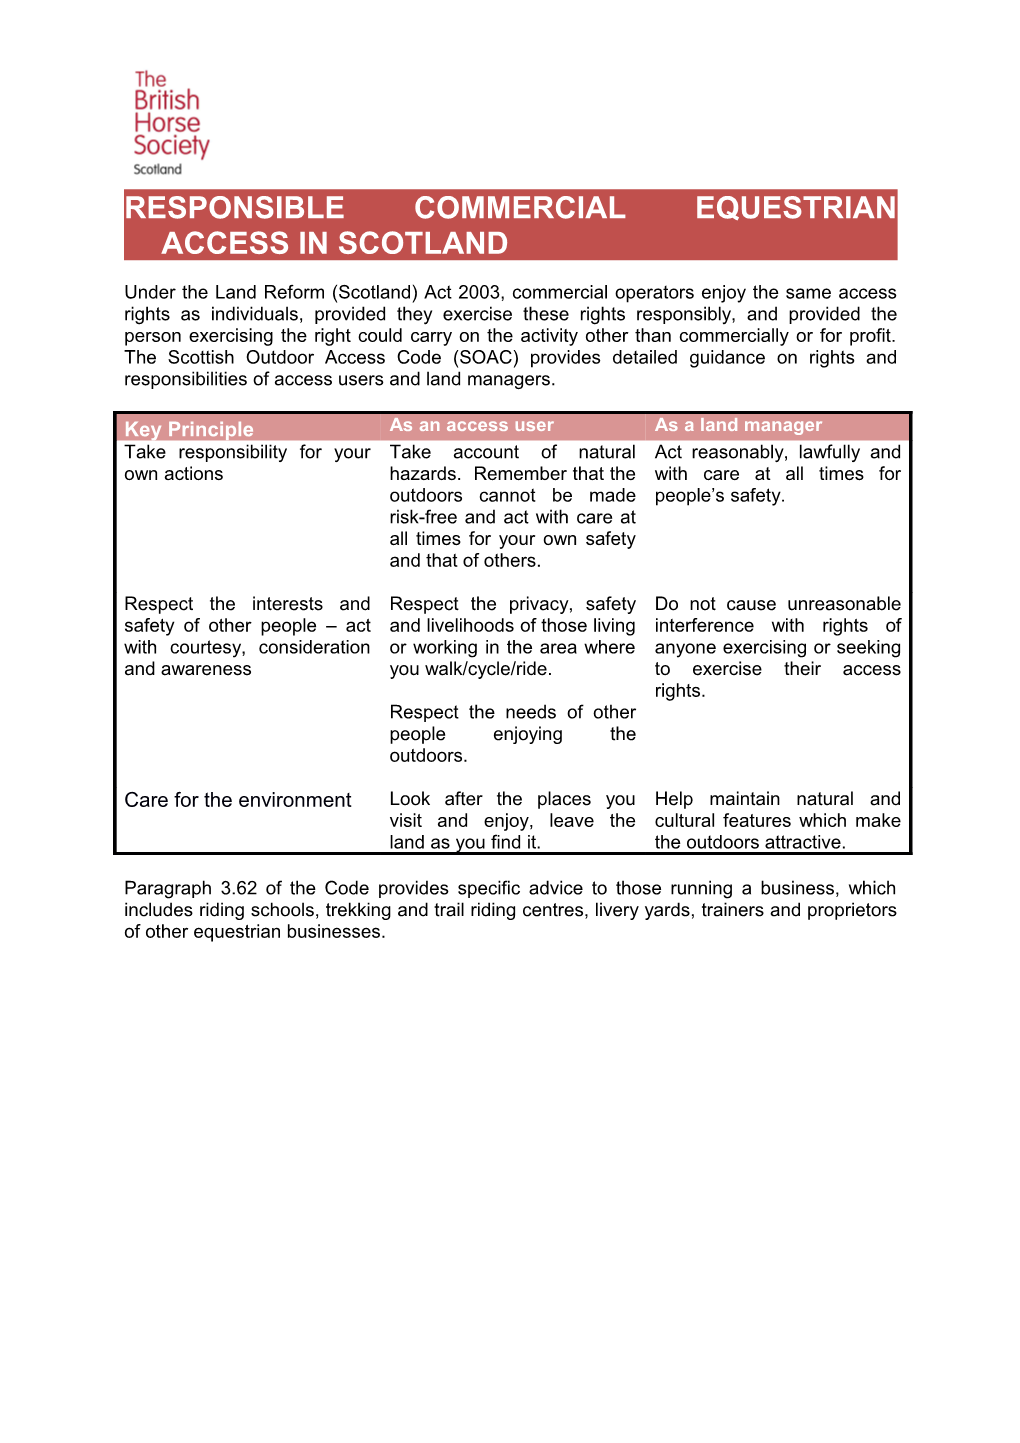 Responsible Commercial Equestrian Access in Scotland